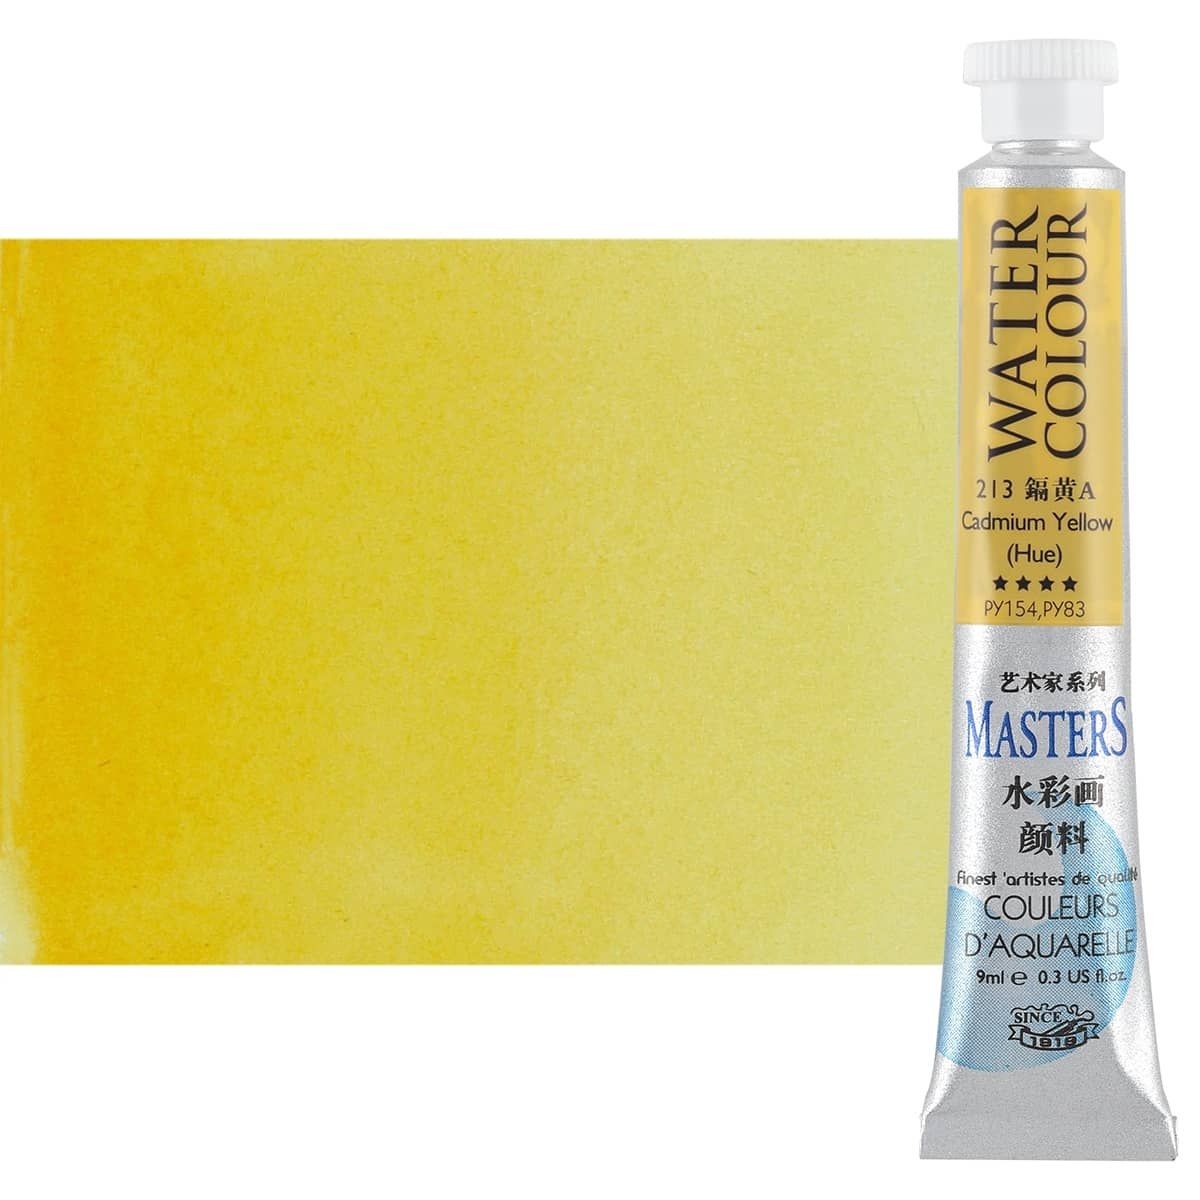 Marie's Master Quality Watercolor 9ml Cadmium Yellow Hue